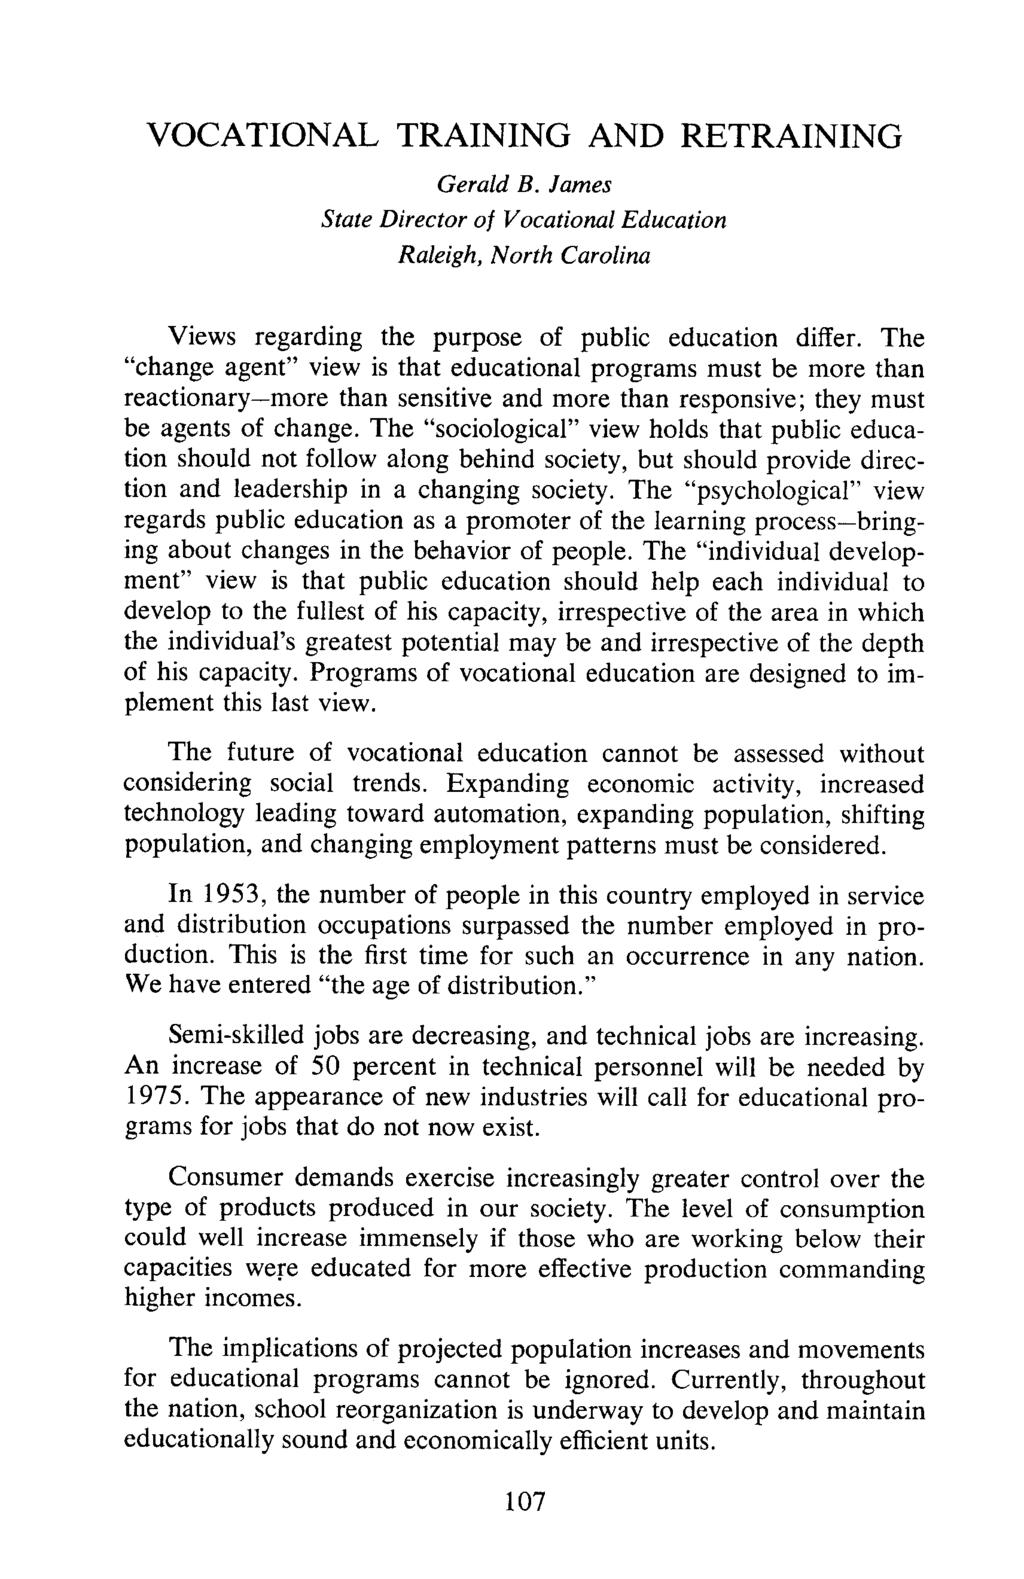 VOCATIONAL TRAINING AND RETRAINING Gerald B. James State Director of Vocational Education Raleigh, North Carolina Views regarding the purpose of public education differ.